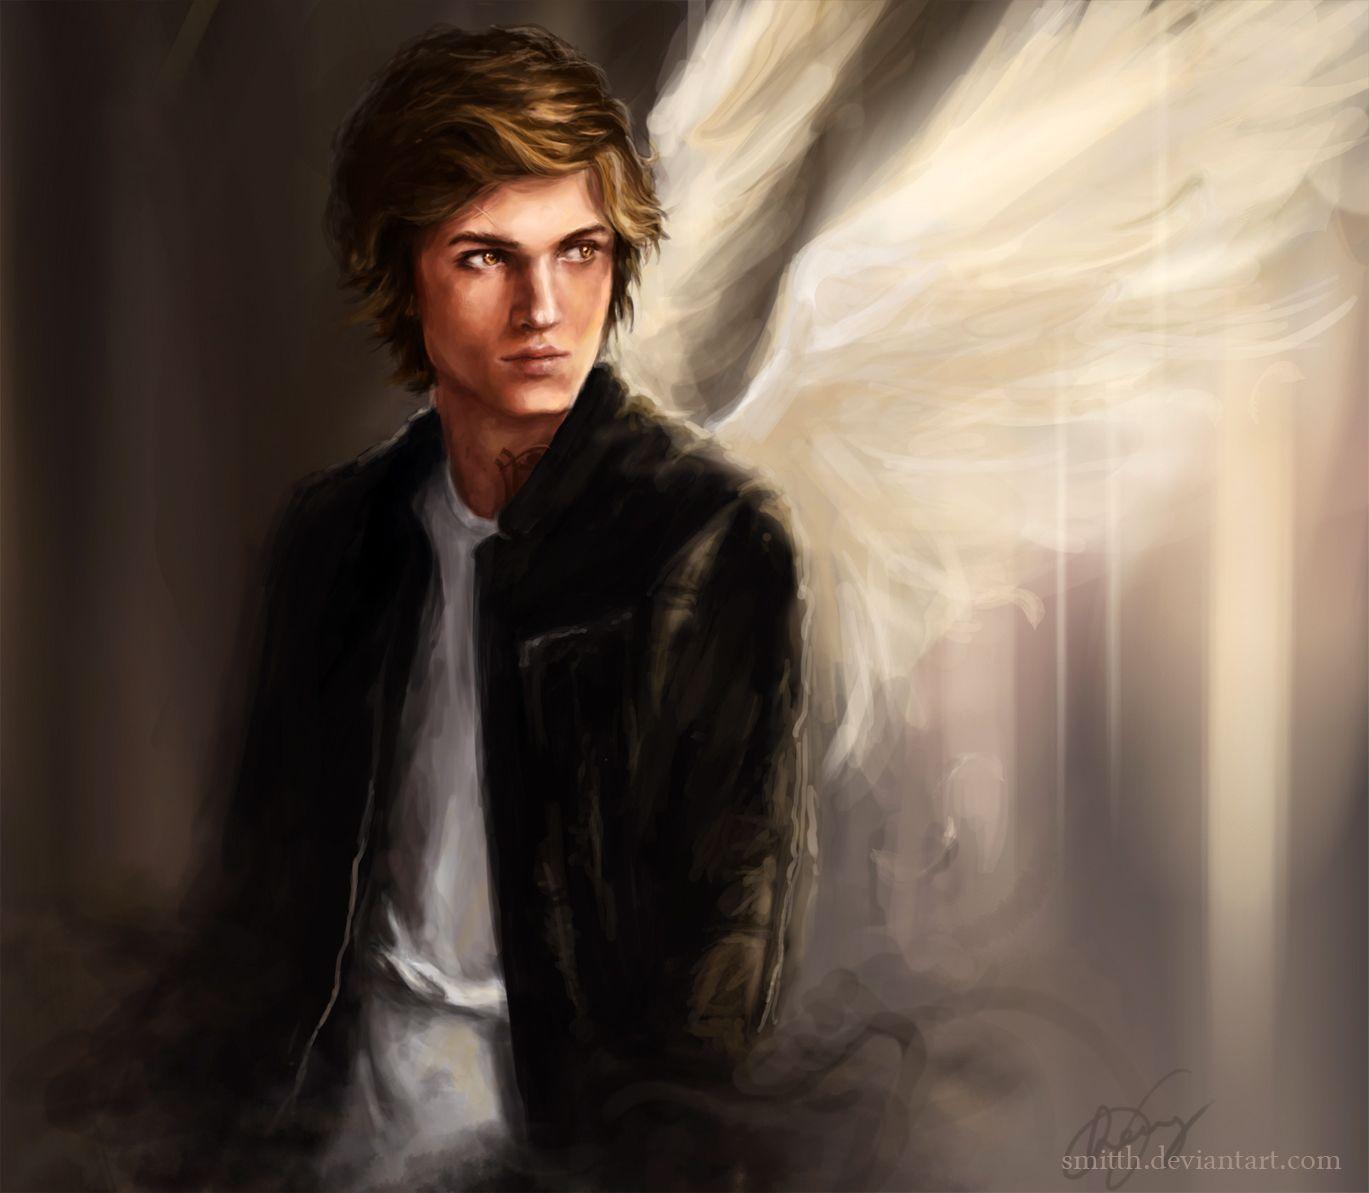 jace wayland drawing by clary